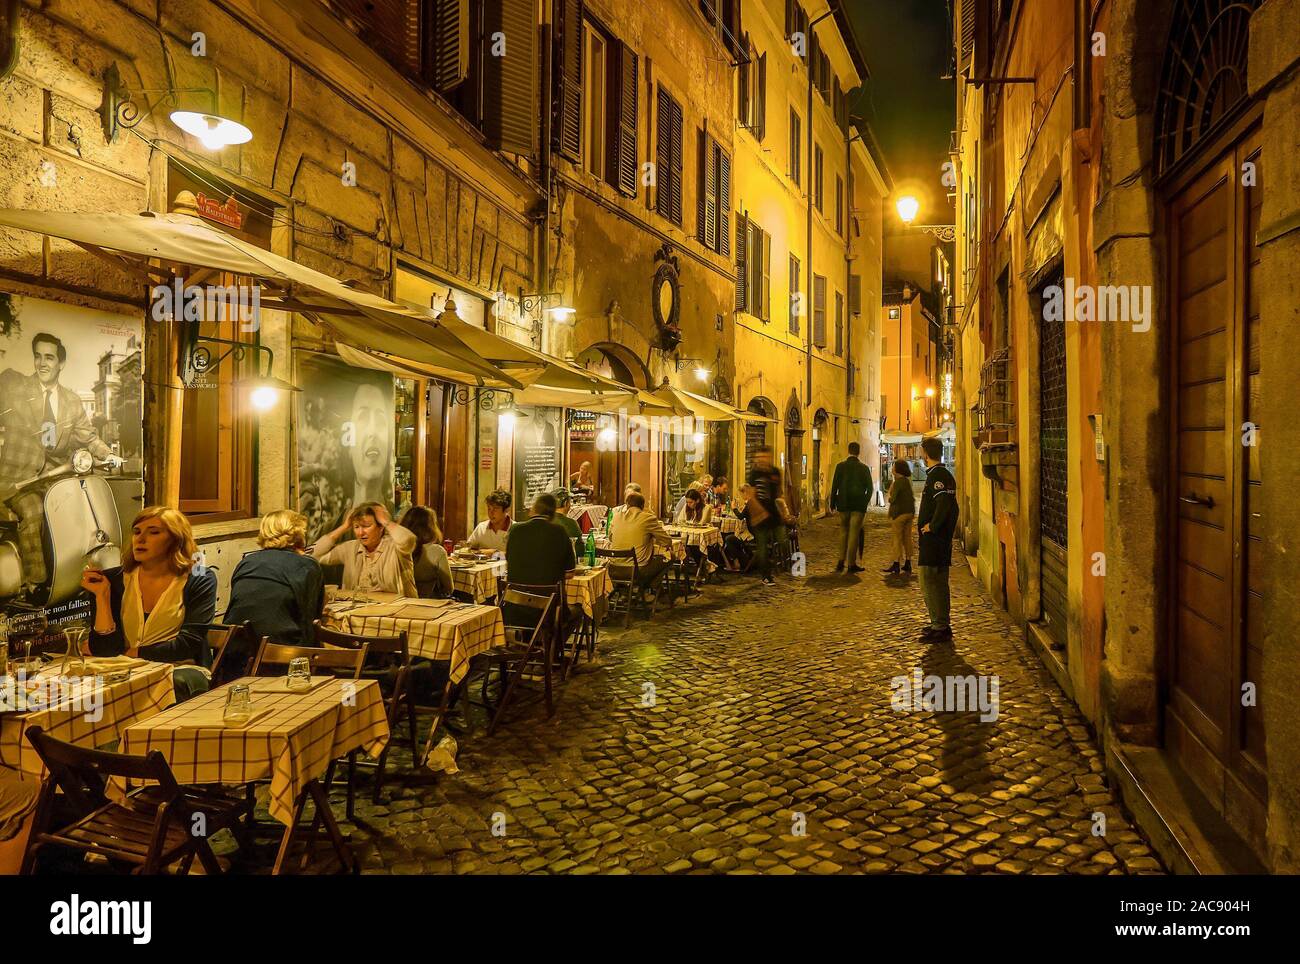 A typical residential street in Rome, where people are dining outdoors at a small neighborhood restaurant on a cobblestone street. Stock Photo